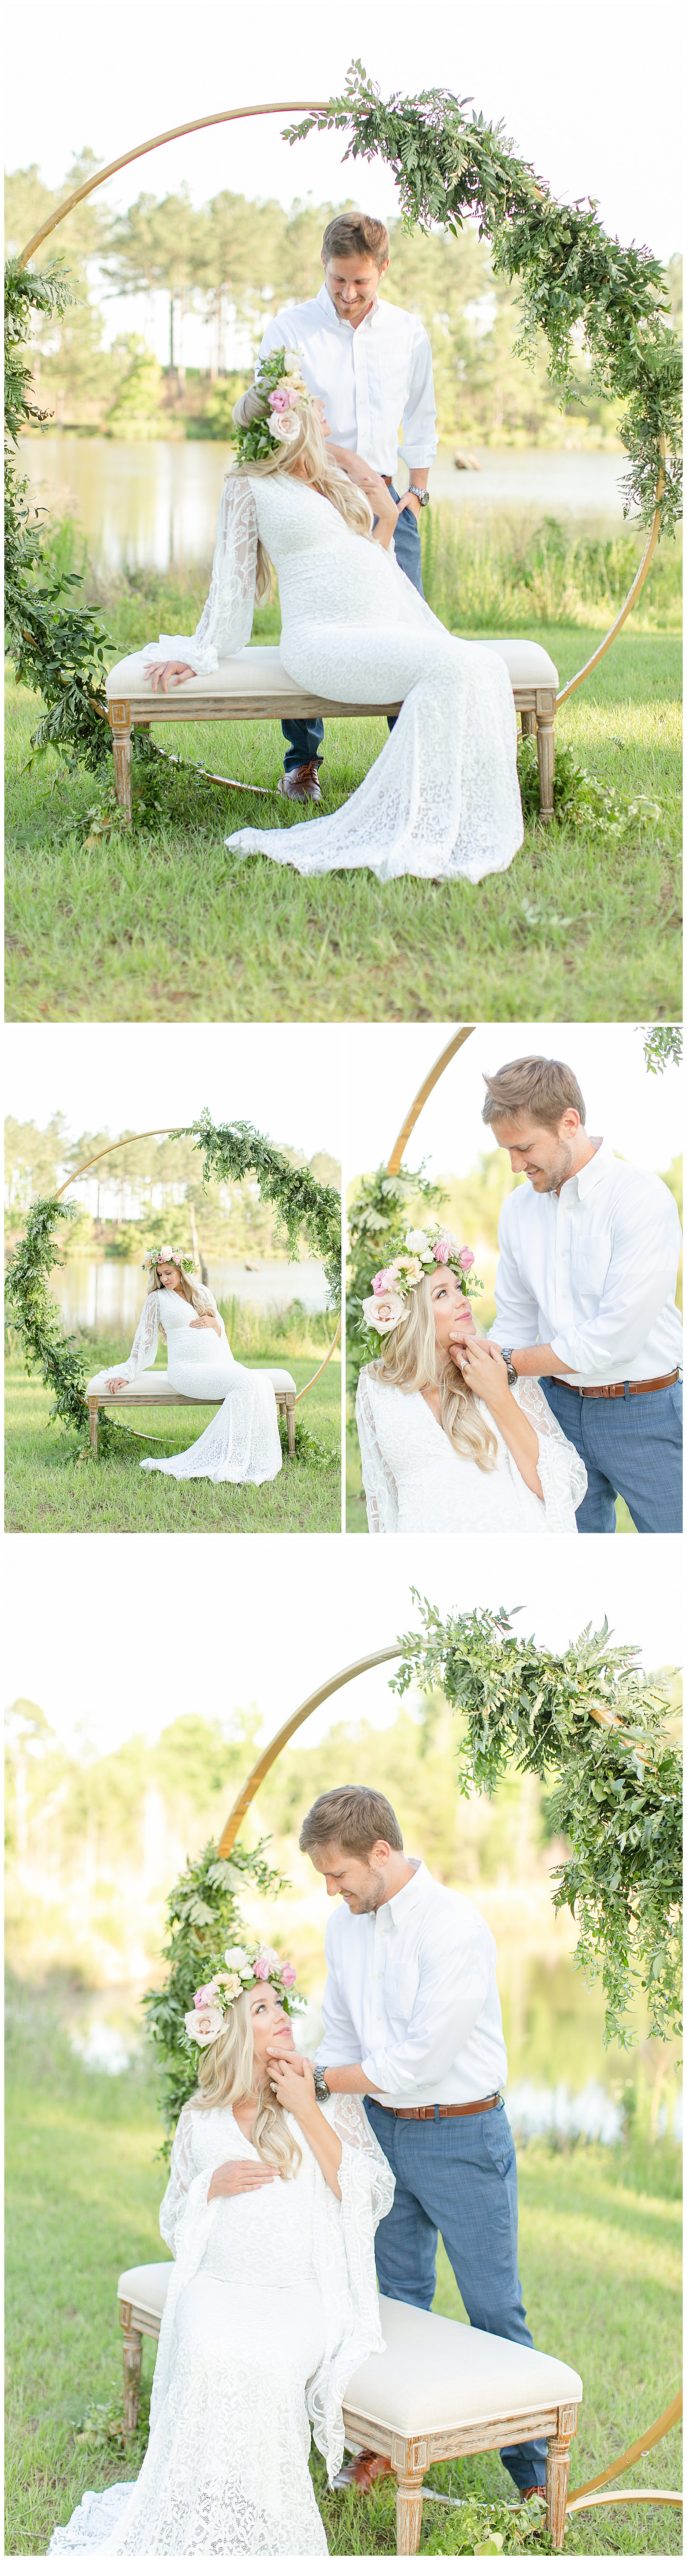 Kristin and Chad underneath a floral arch 